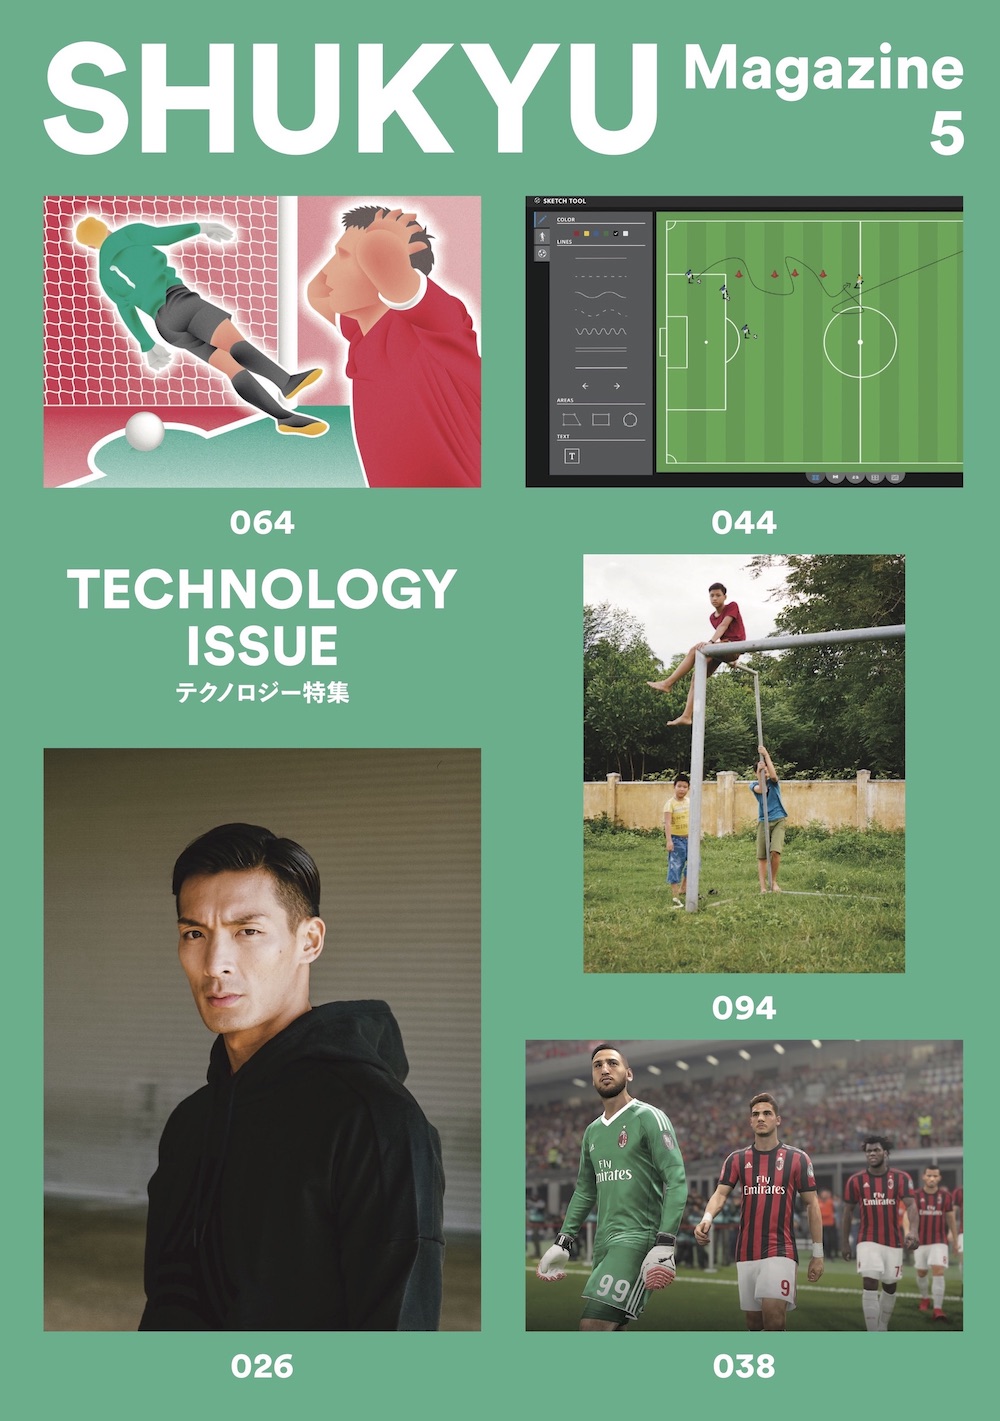 ISSUE 5 | TECHNOLOGY